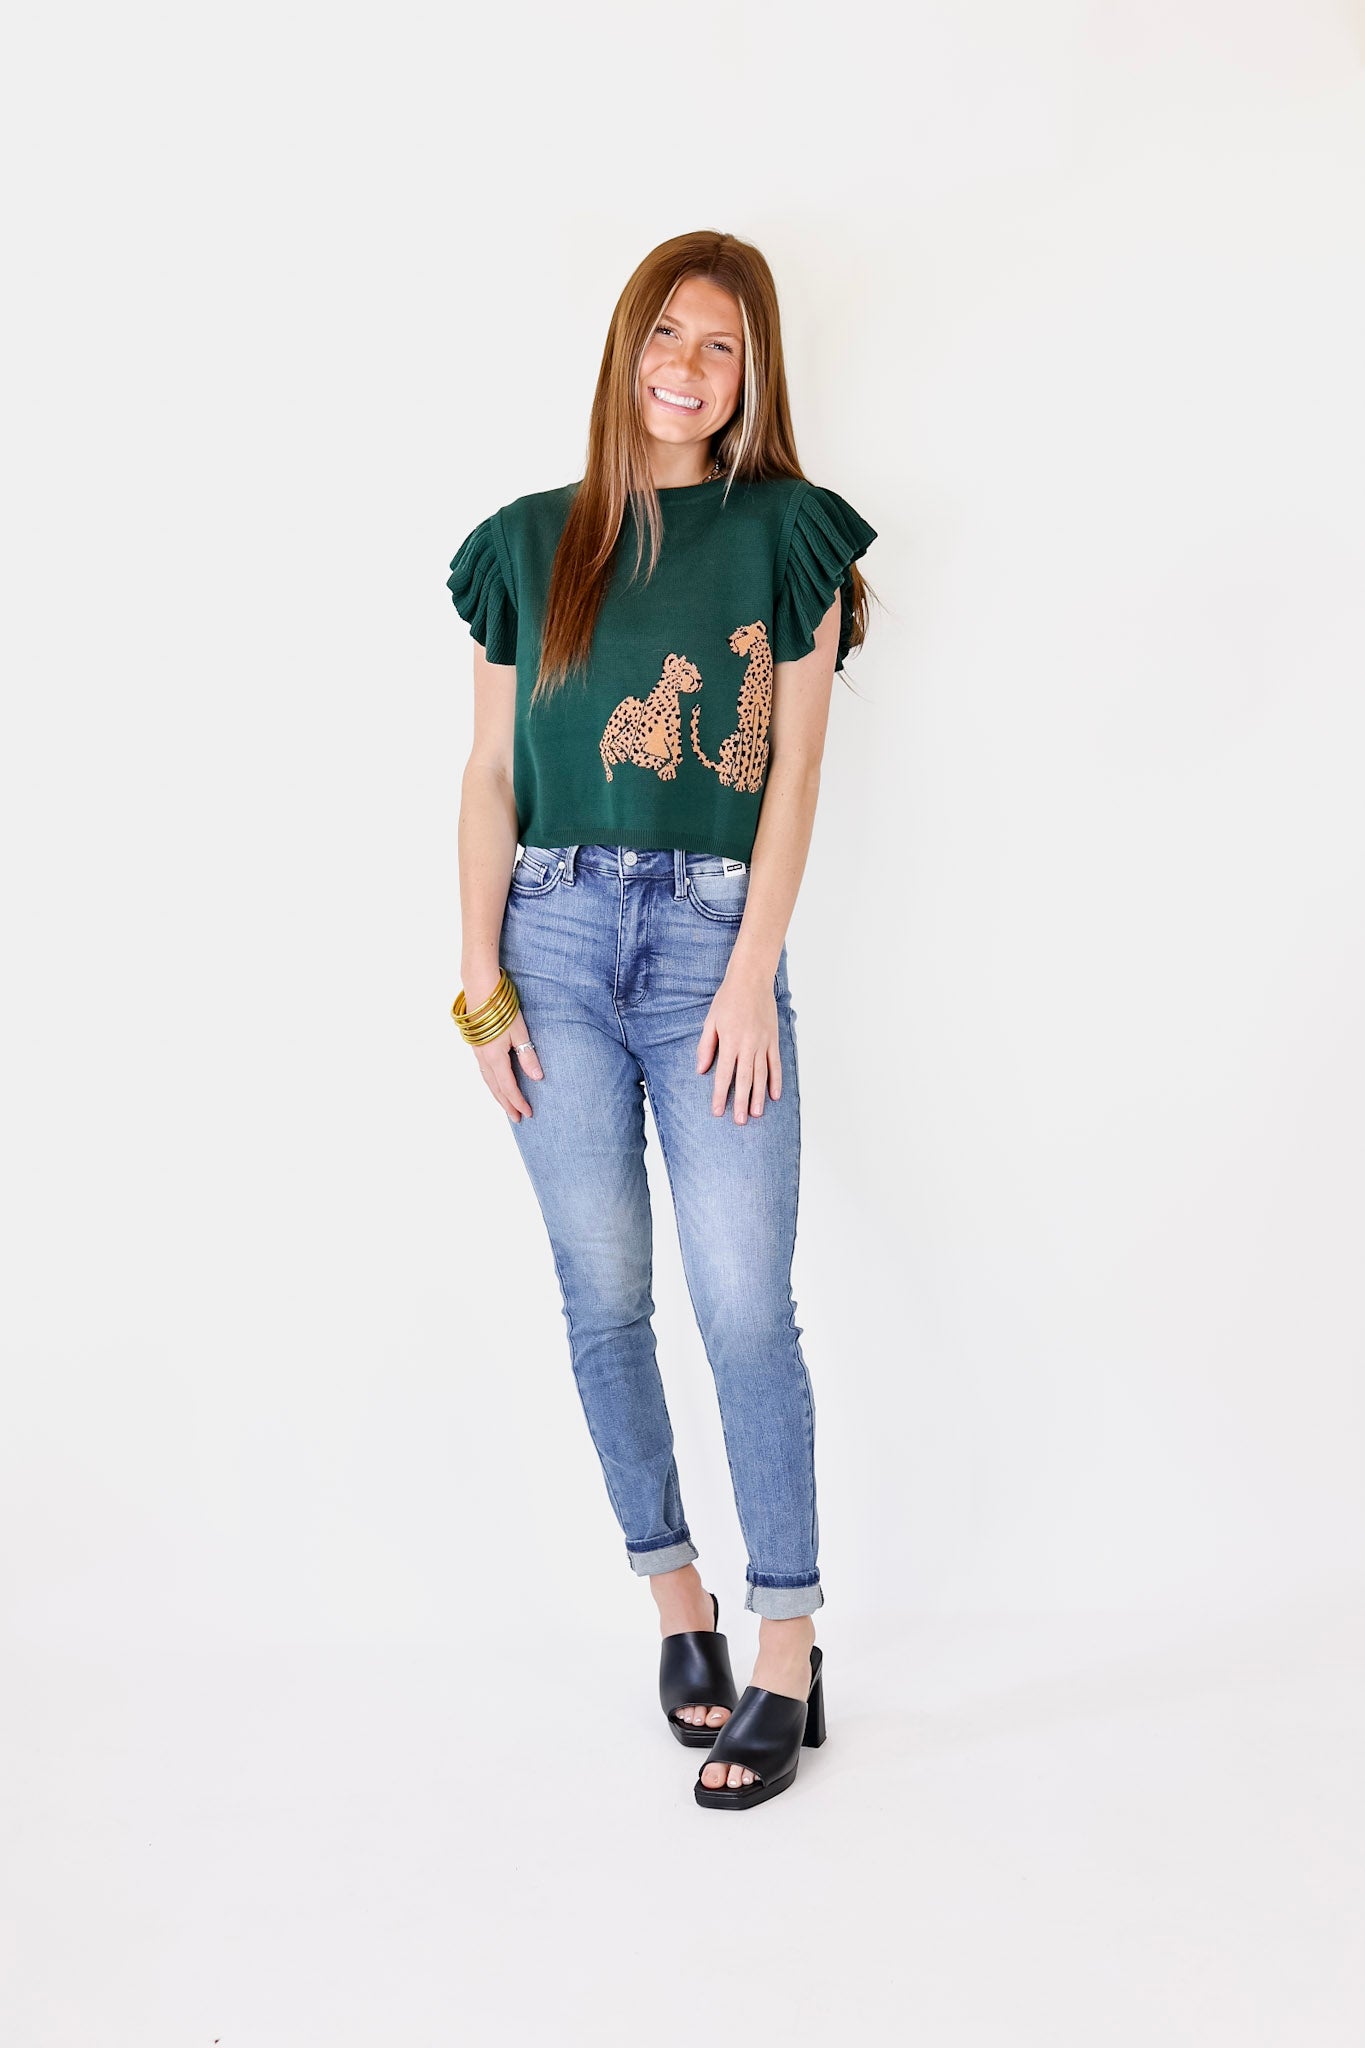 Talk This Way Cheetah Print Sweater Top with Ruffle Cap Sleeves in Hunter Green - Giddy Up Glamour Boutique